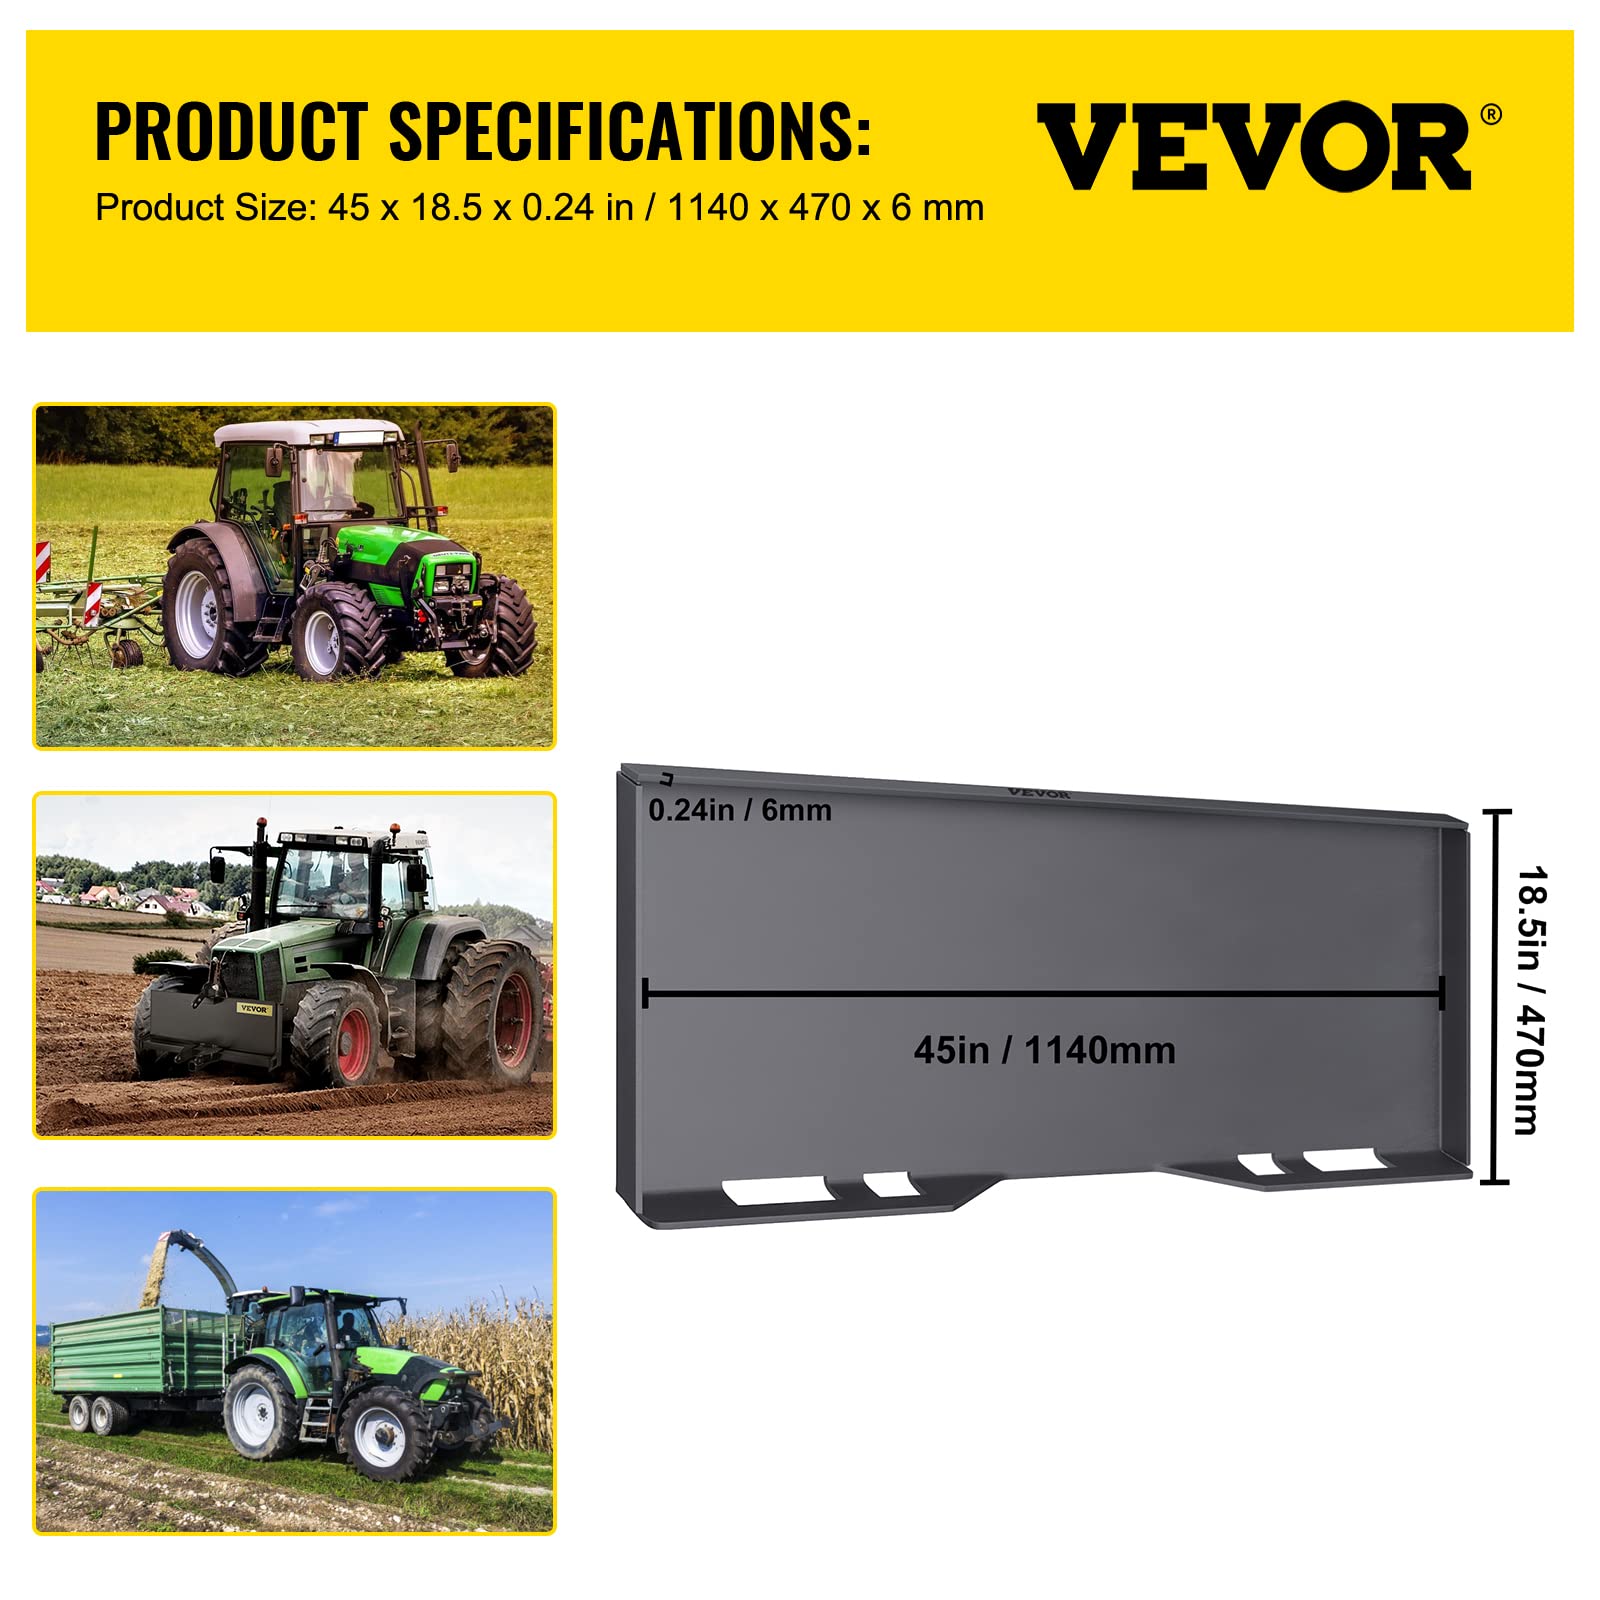 VEVOR 1/4" Skid Steer Attachment Plate Steel Skid Steer Mount Plate Quick Attachment Loader Plate Easy to Weld or Bolt to Different Accessories